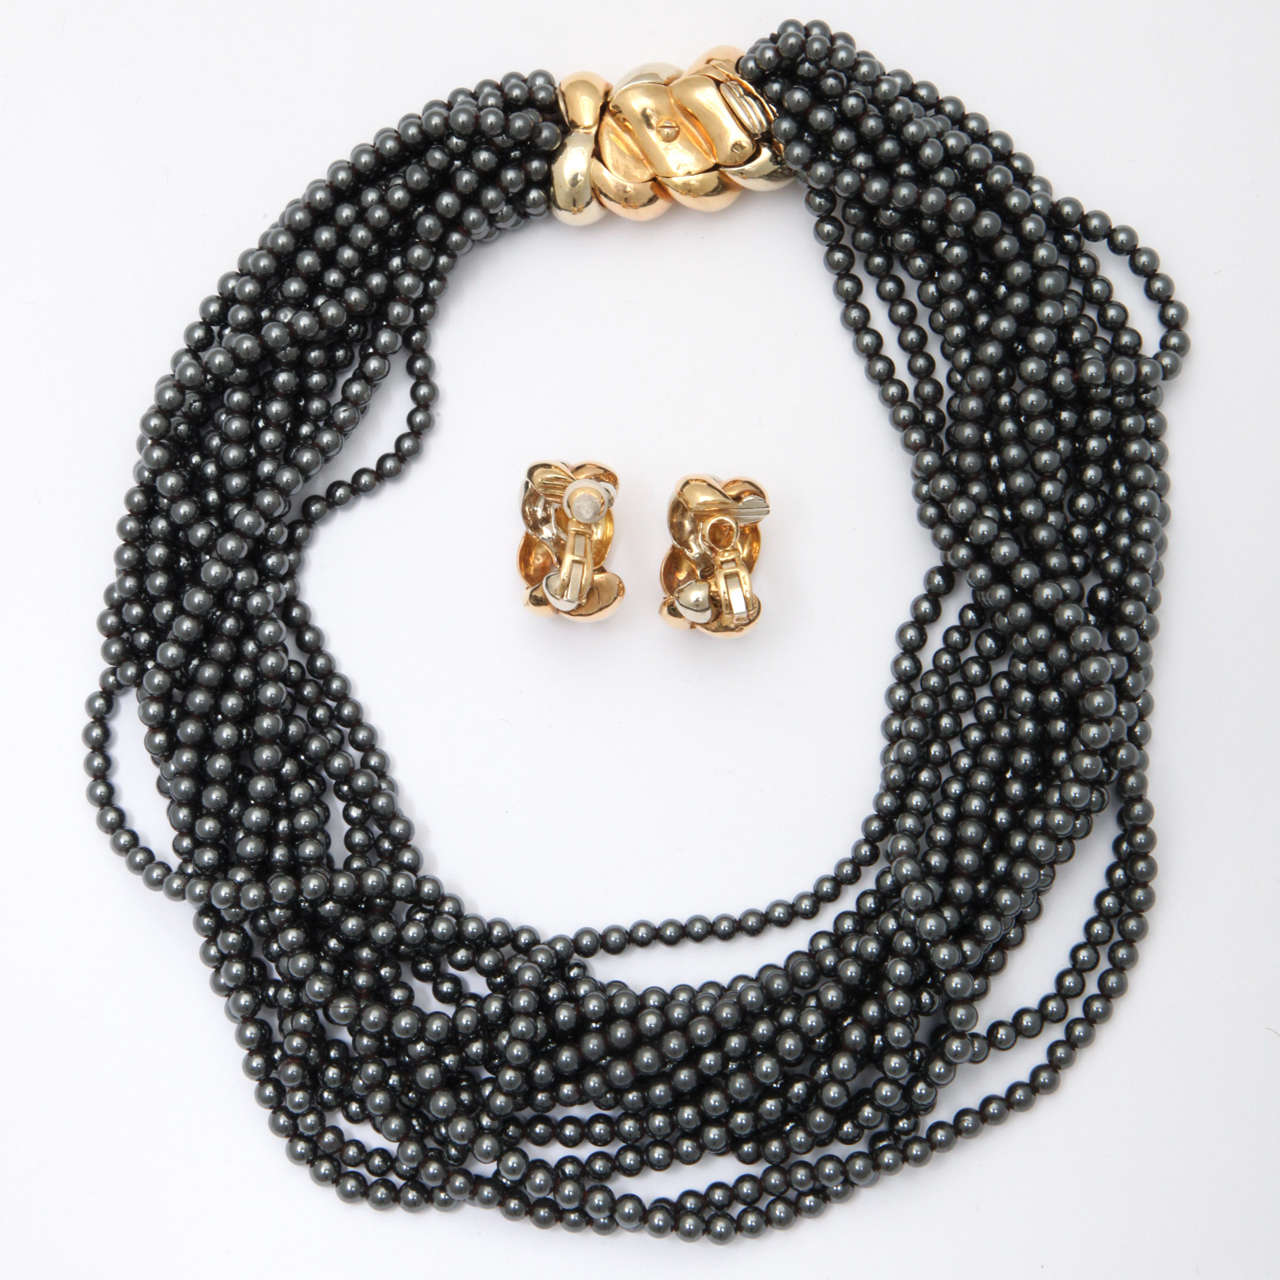 14 Strand Hematite bead Necklace with Oversize 18kt White & Yellow Gold Necklace.  Very chic & High Style.  Earrings not included. Made by Poiray of The Place Vendome in Paris.d